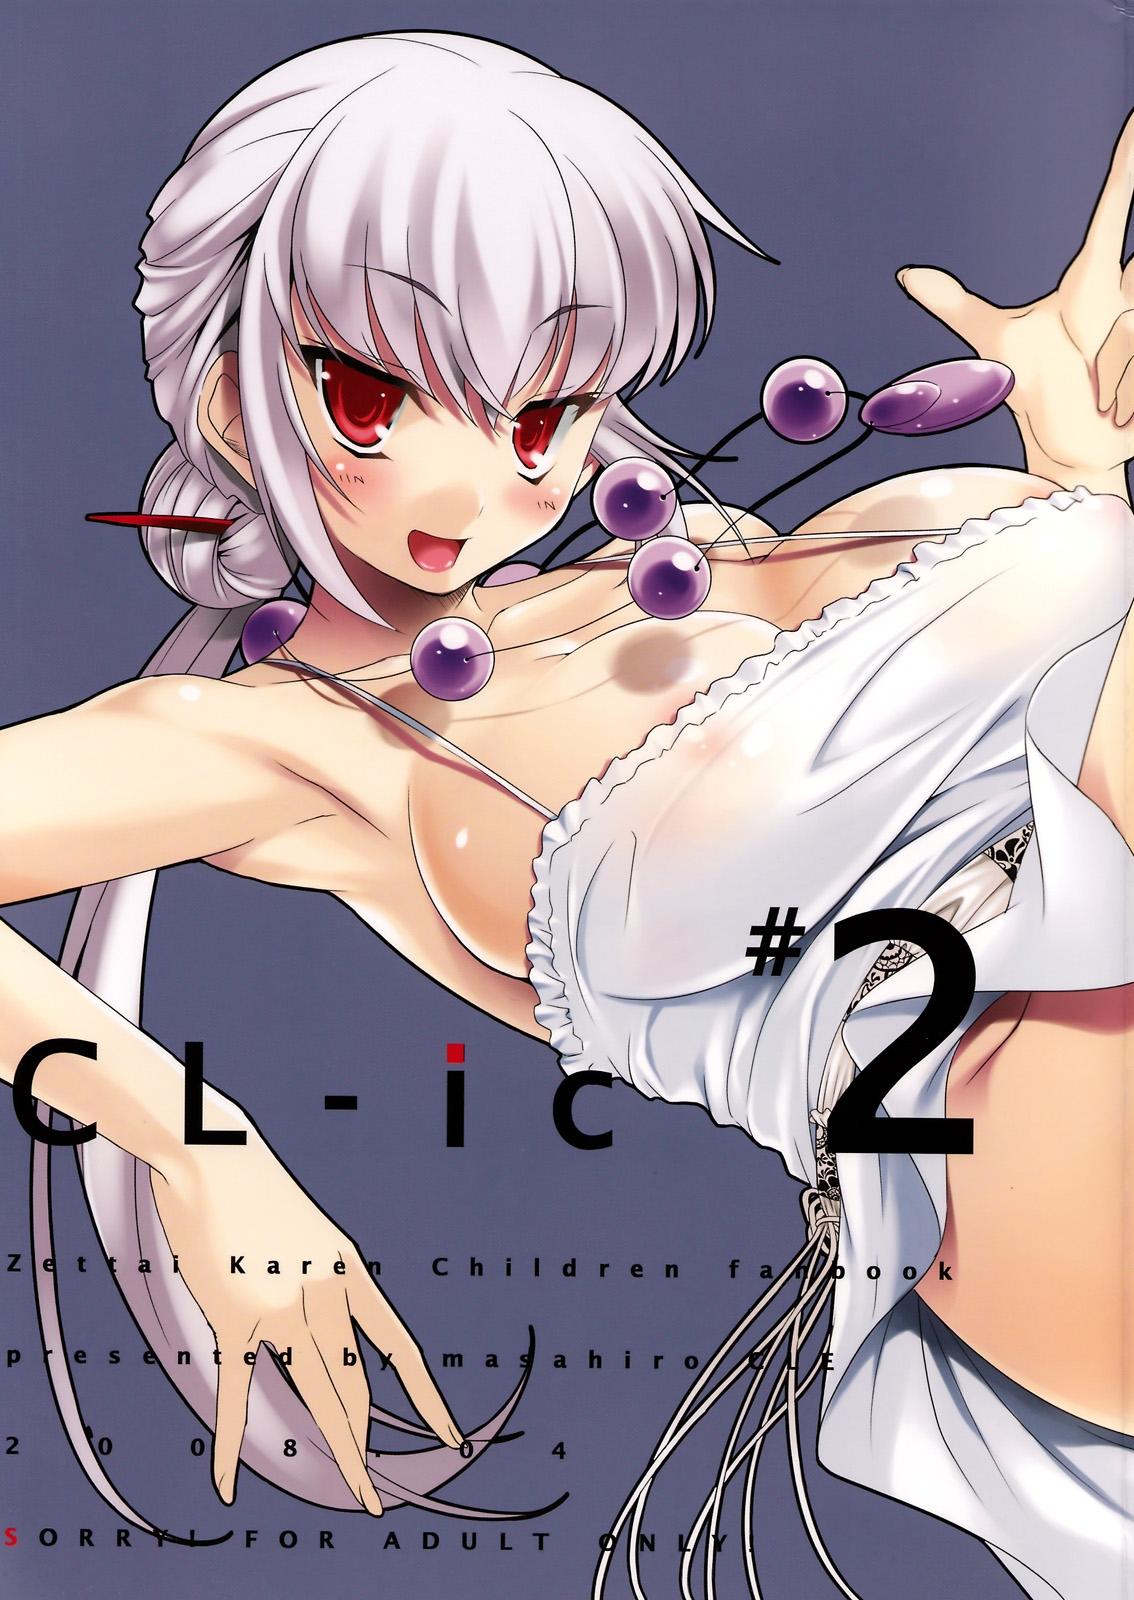 CL-ic #2 0